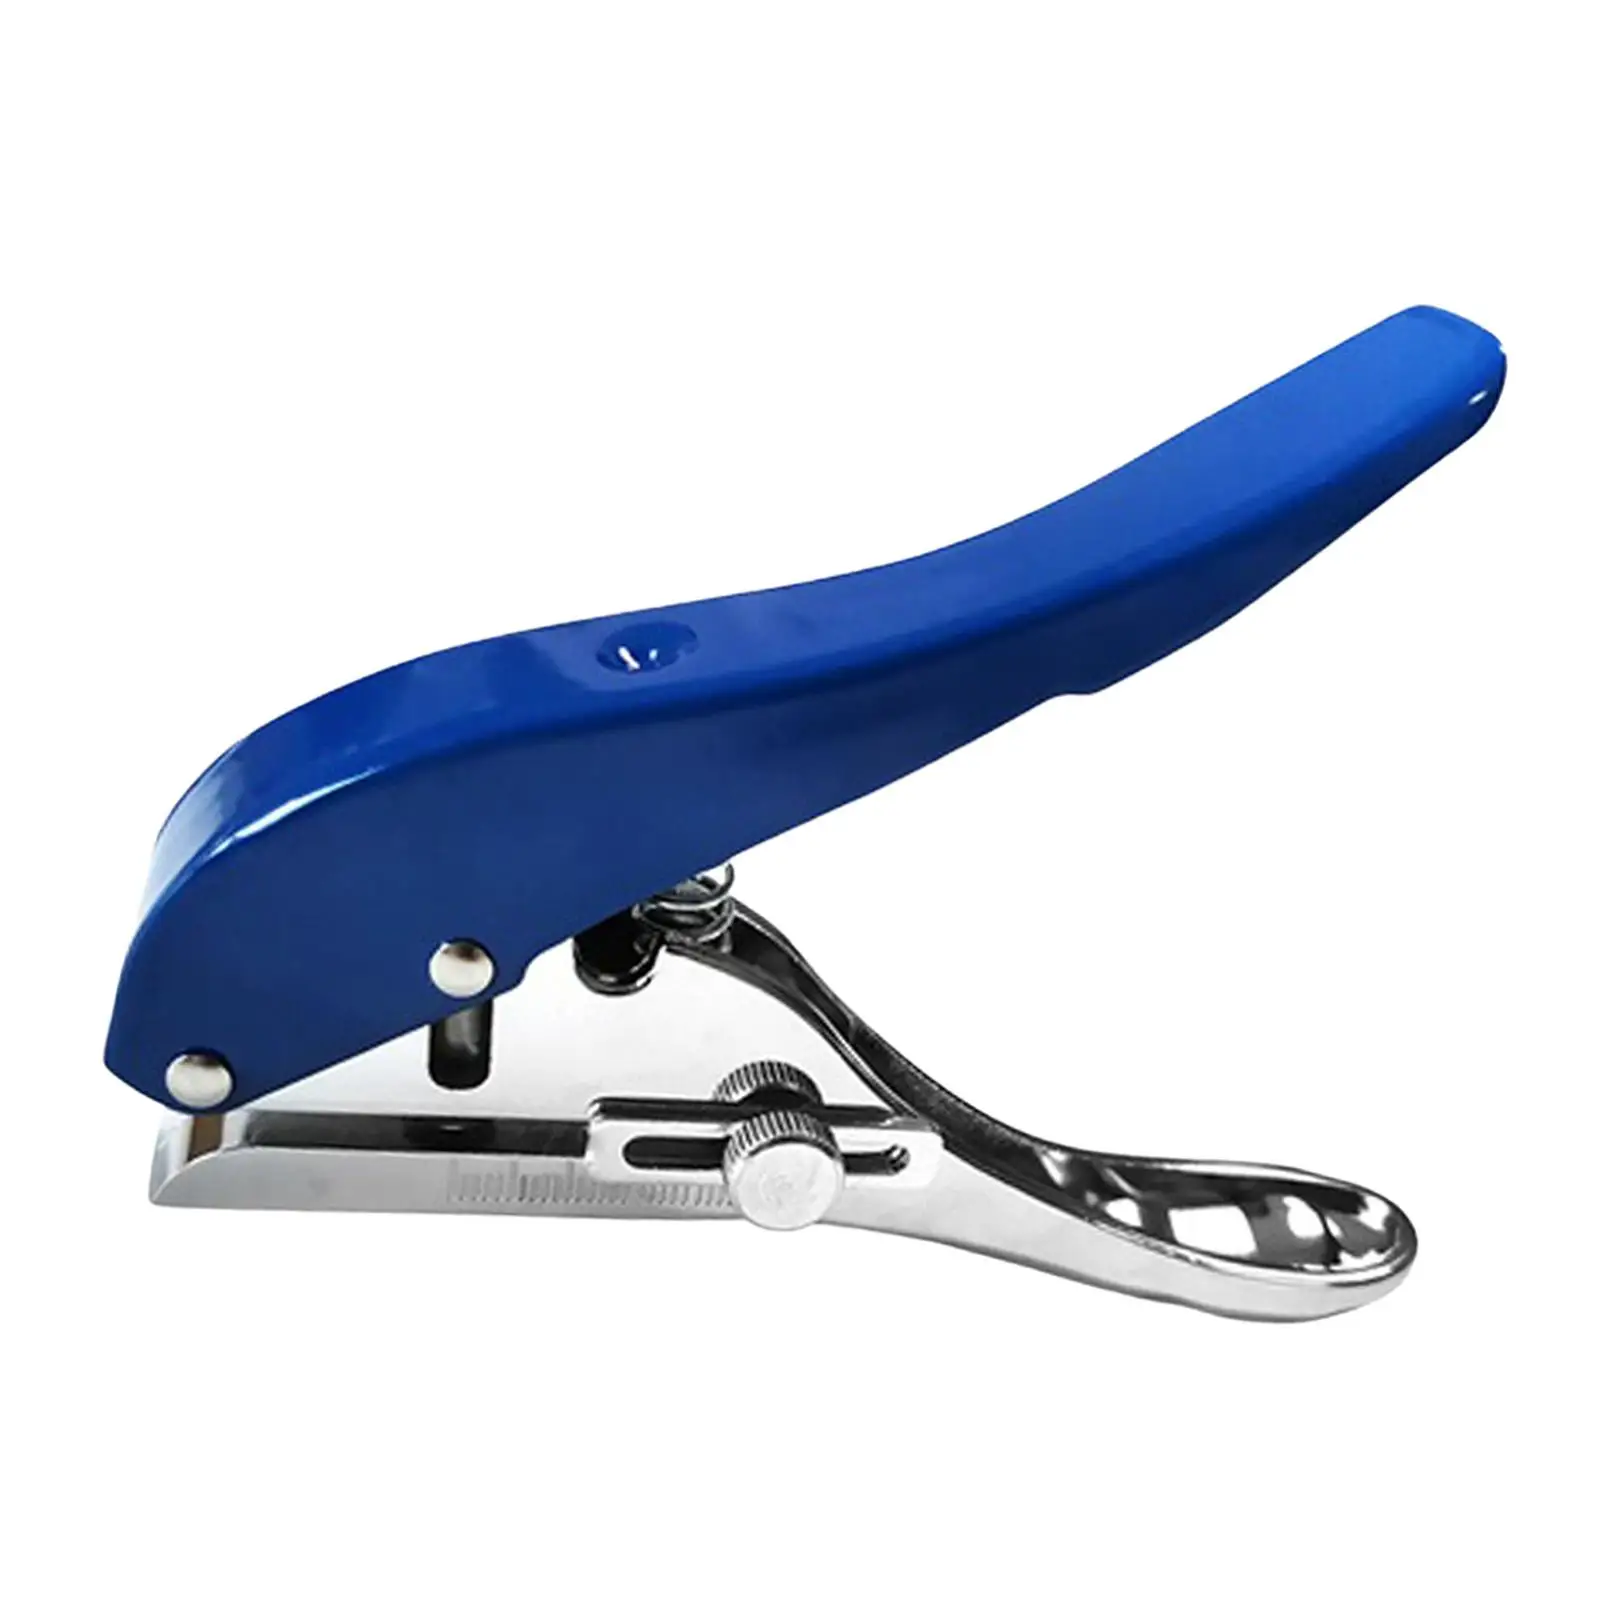 Single Hole Punch Punching Tool Punching Pliers for Craft Paper Photo Labels